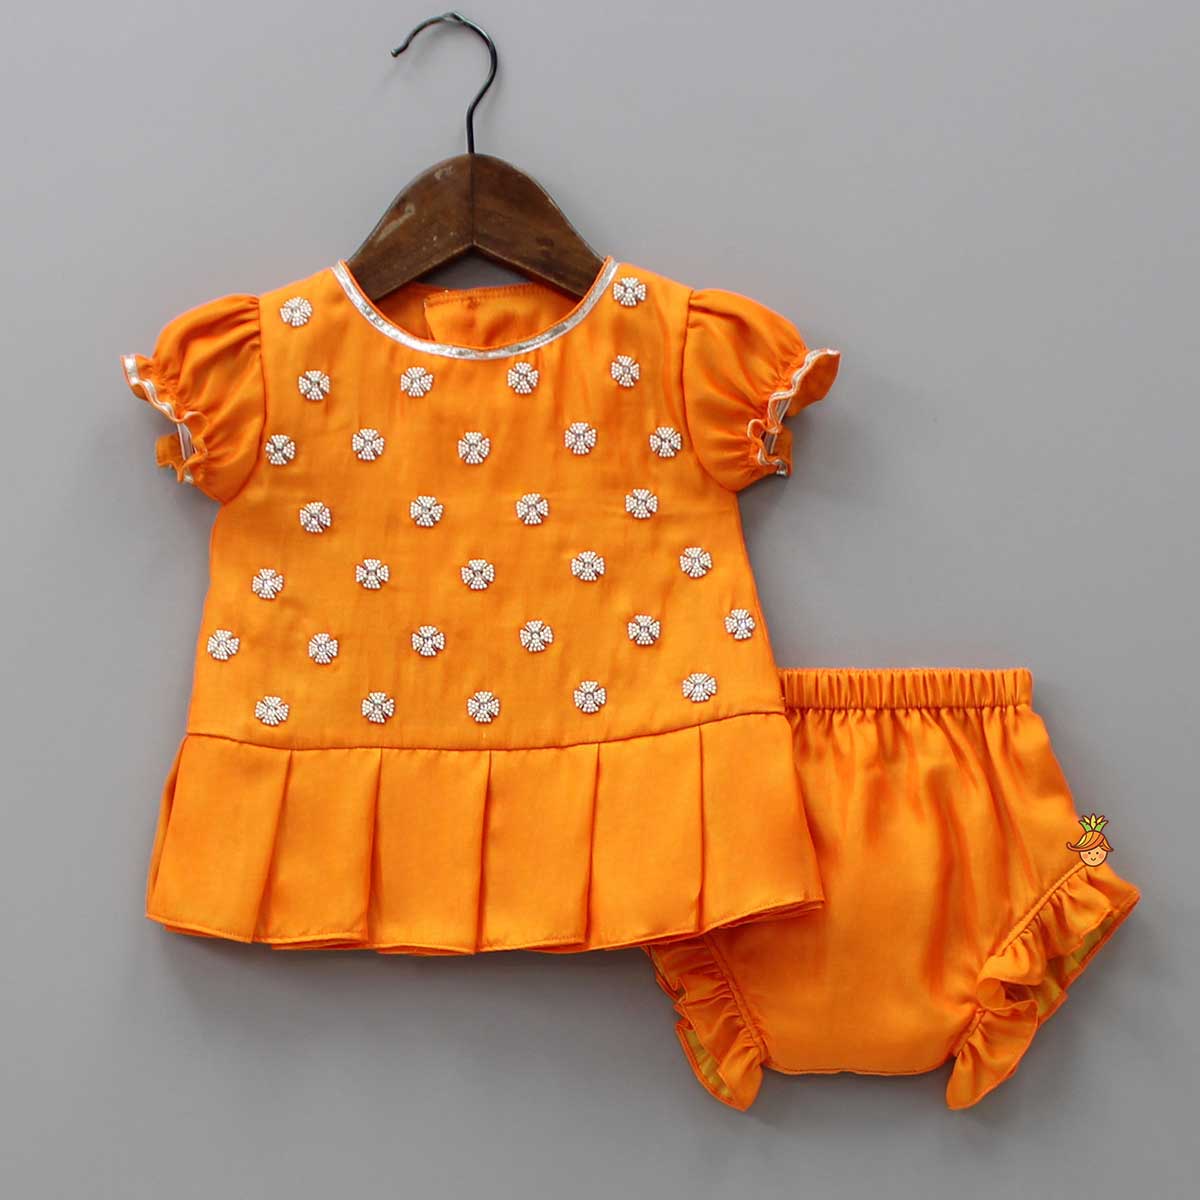 Embroidered Yoke Orange Top And Bloomer